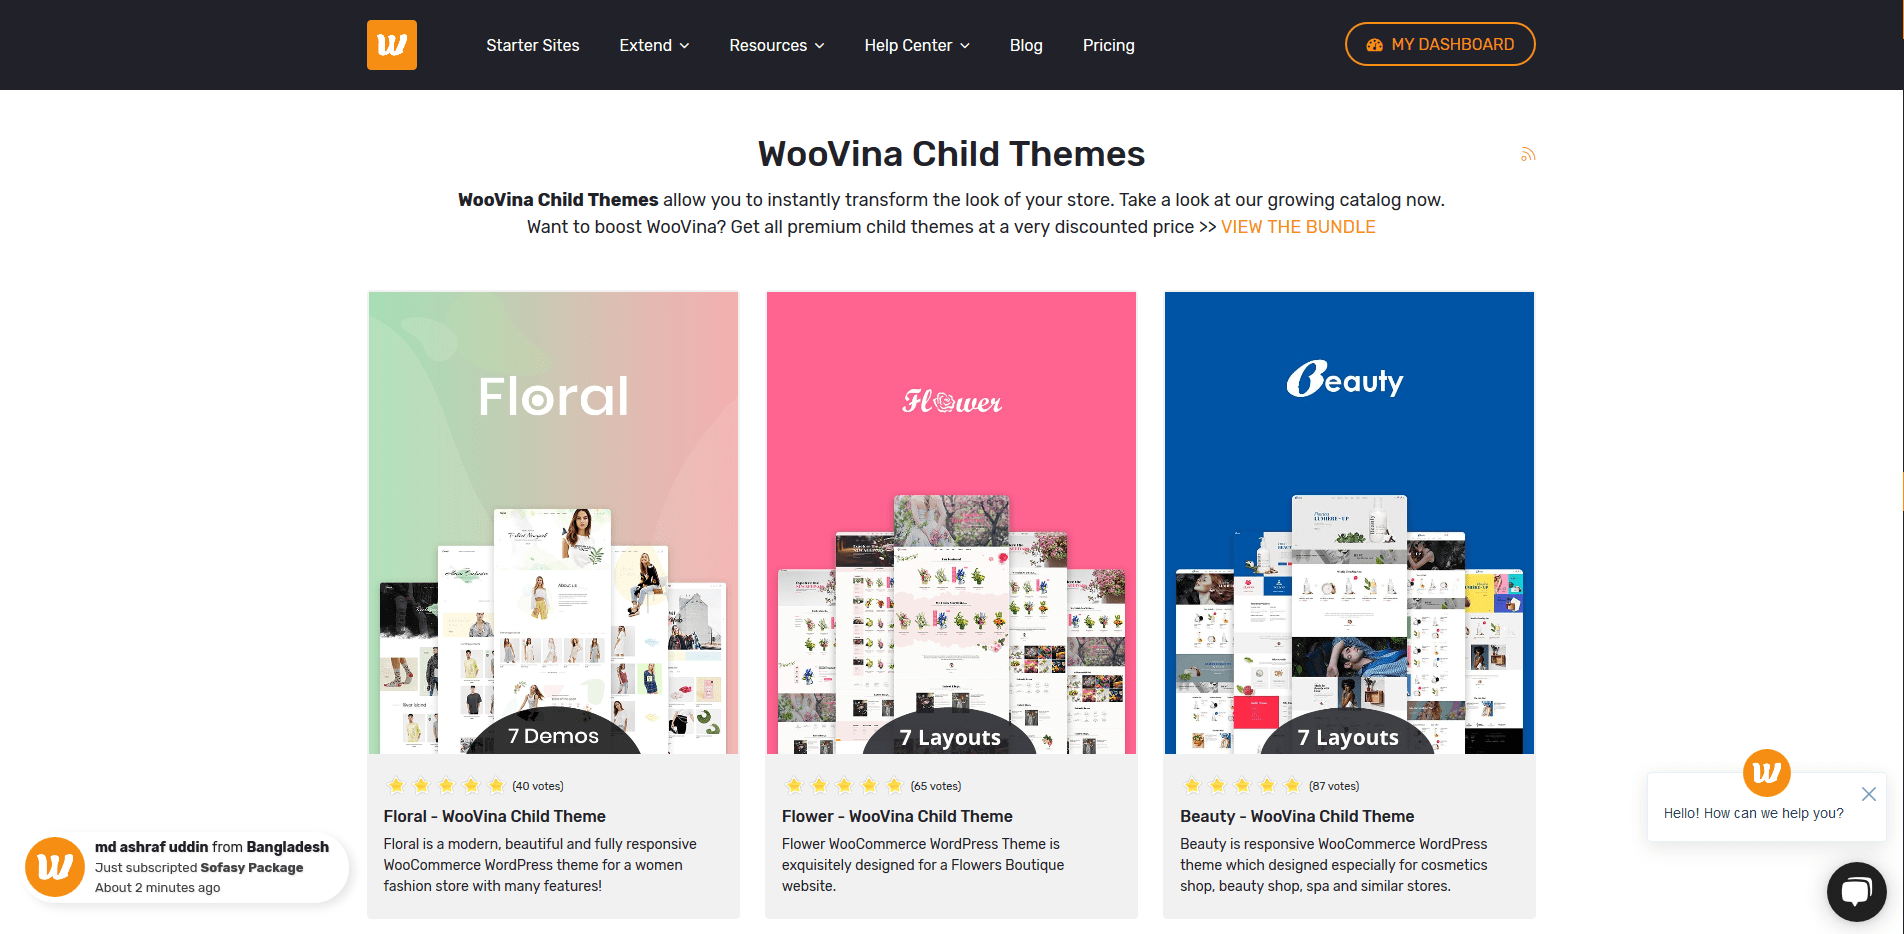 How to install and import demos of a child theme?